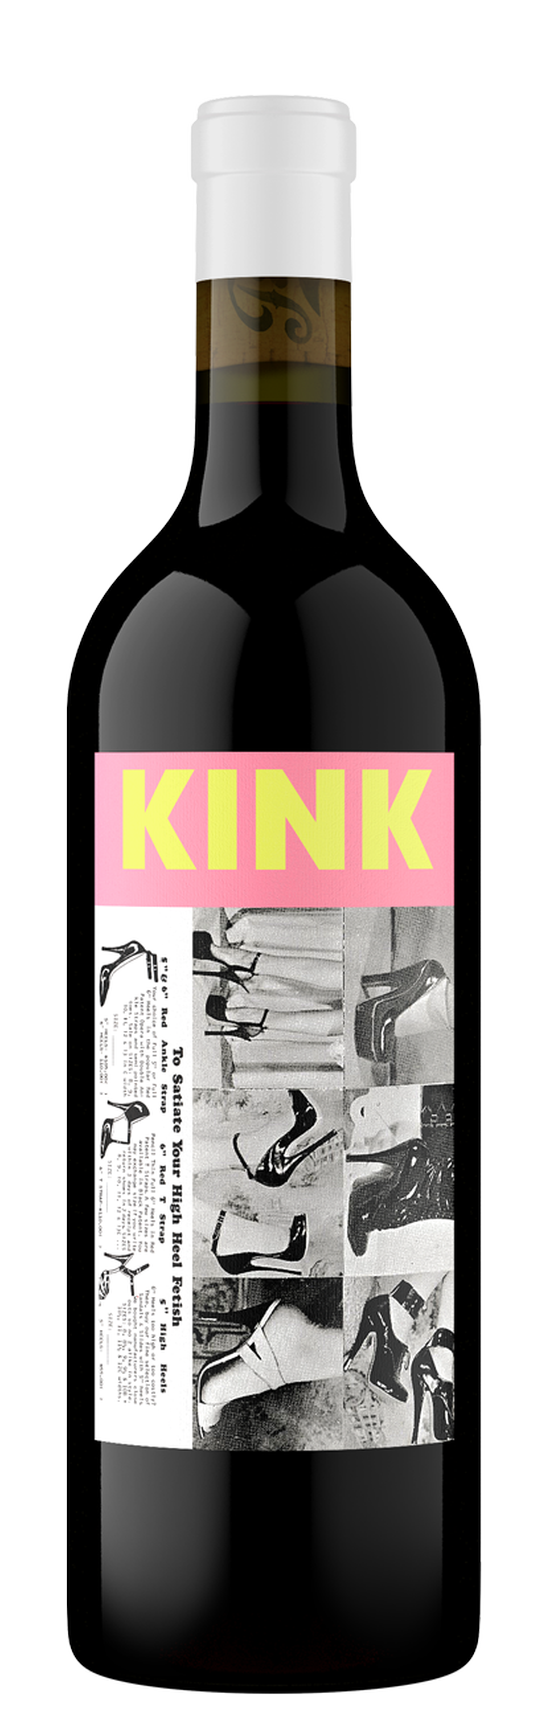 2019 Paso Kink, Red Wine, Paso Robles